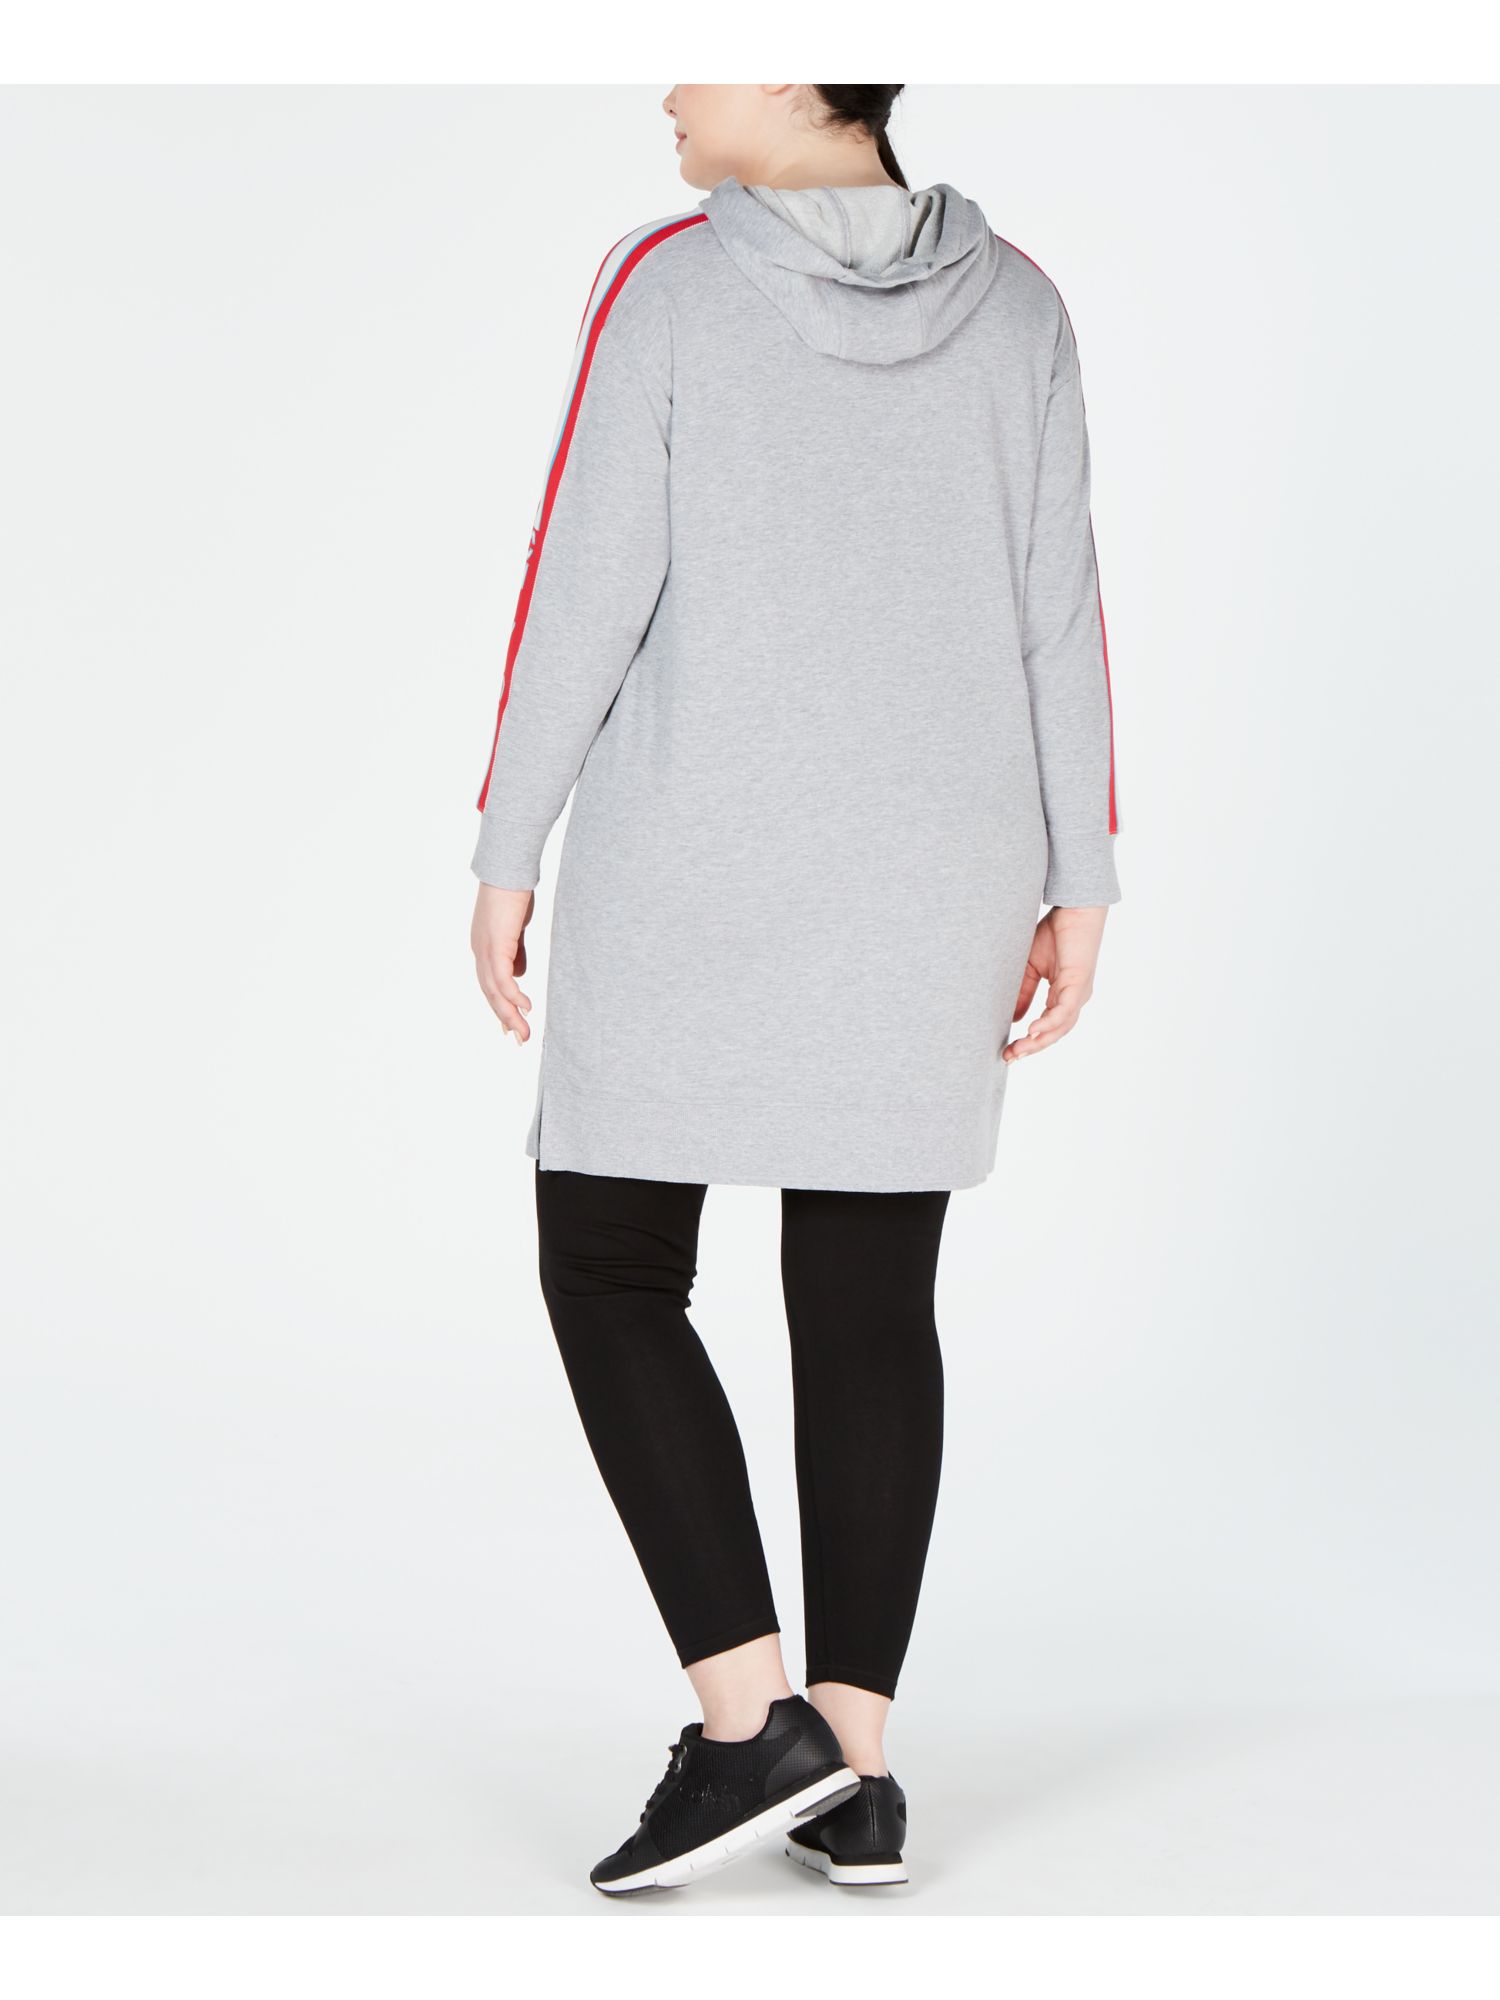 Calvin Klein Womens Hooded Sweater Dress, Grey, 2X - image 2 of 4